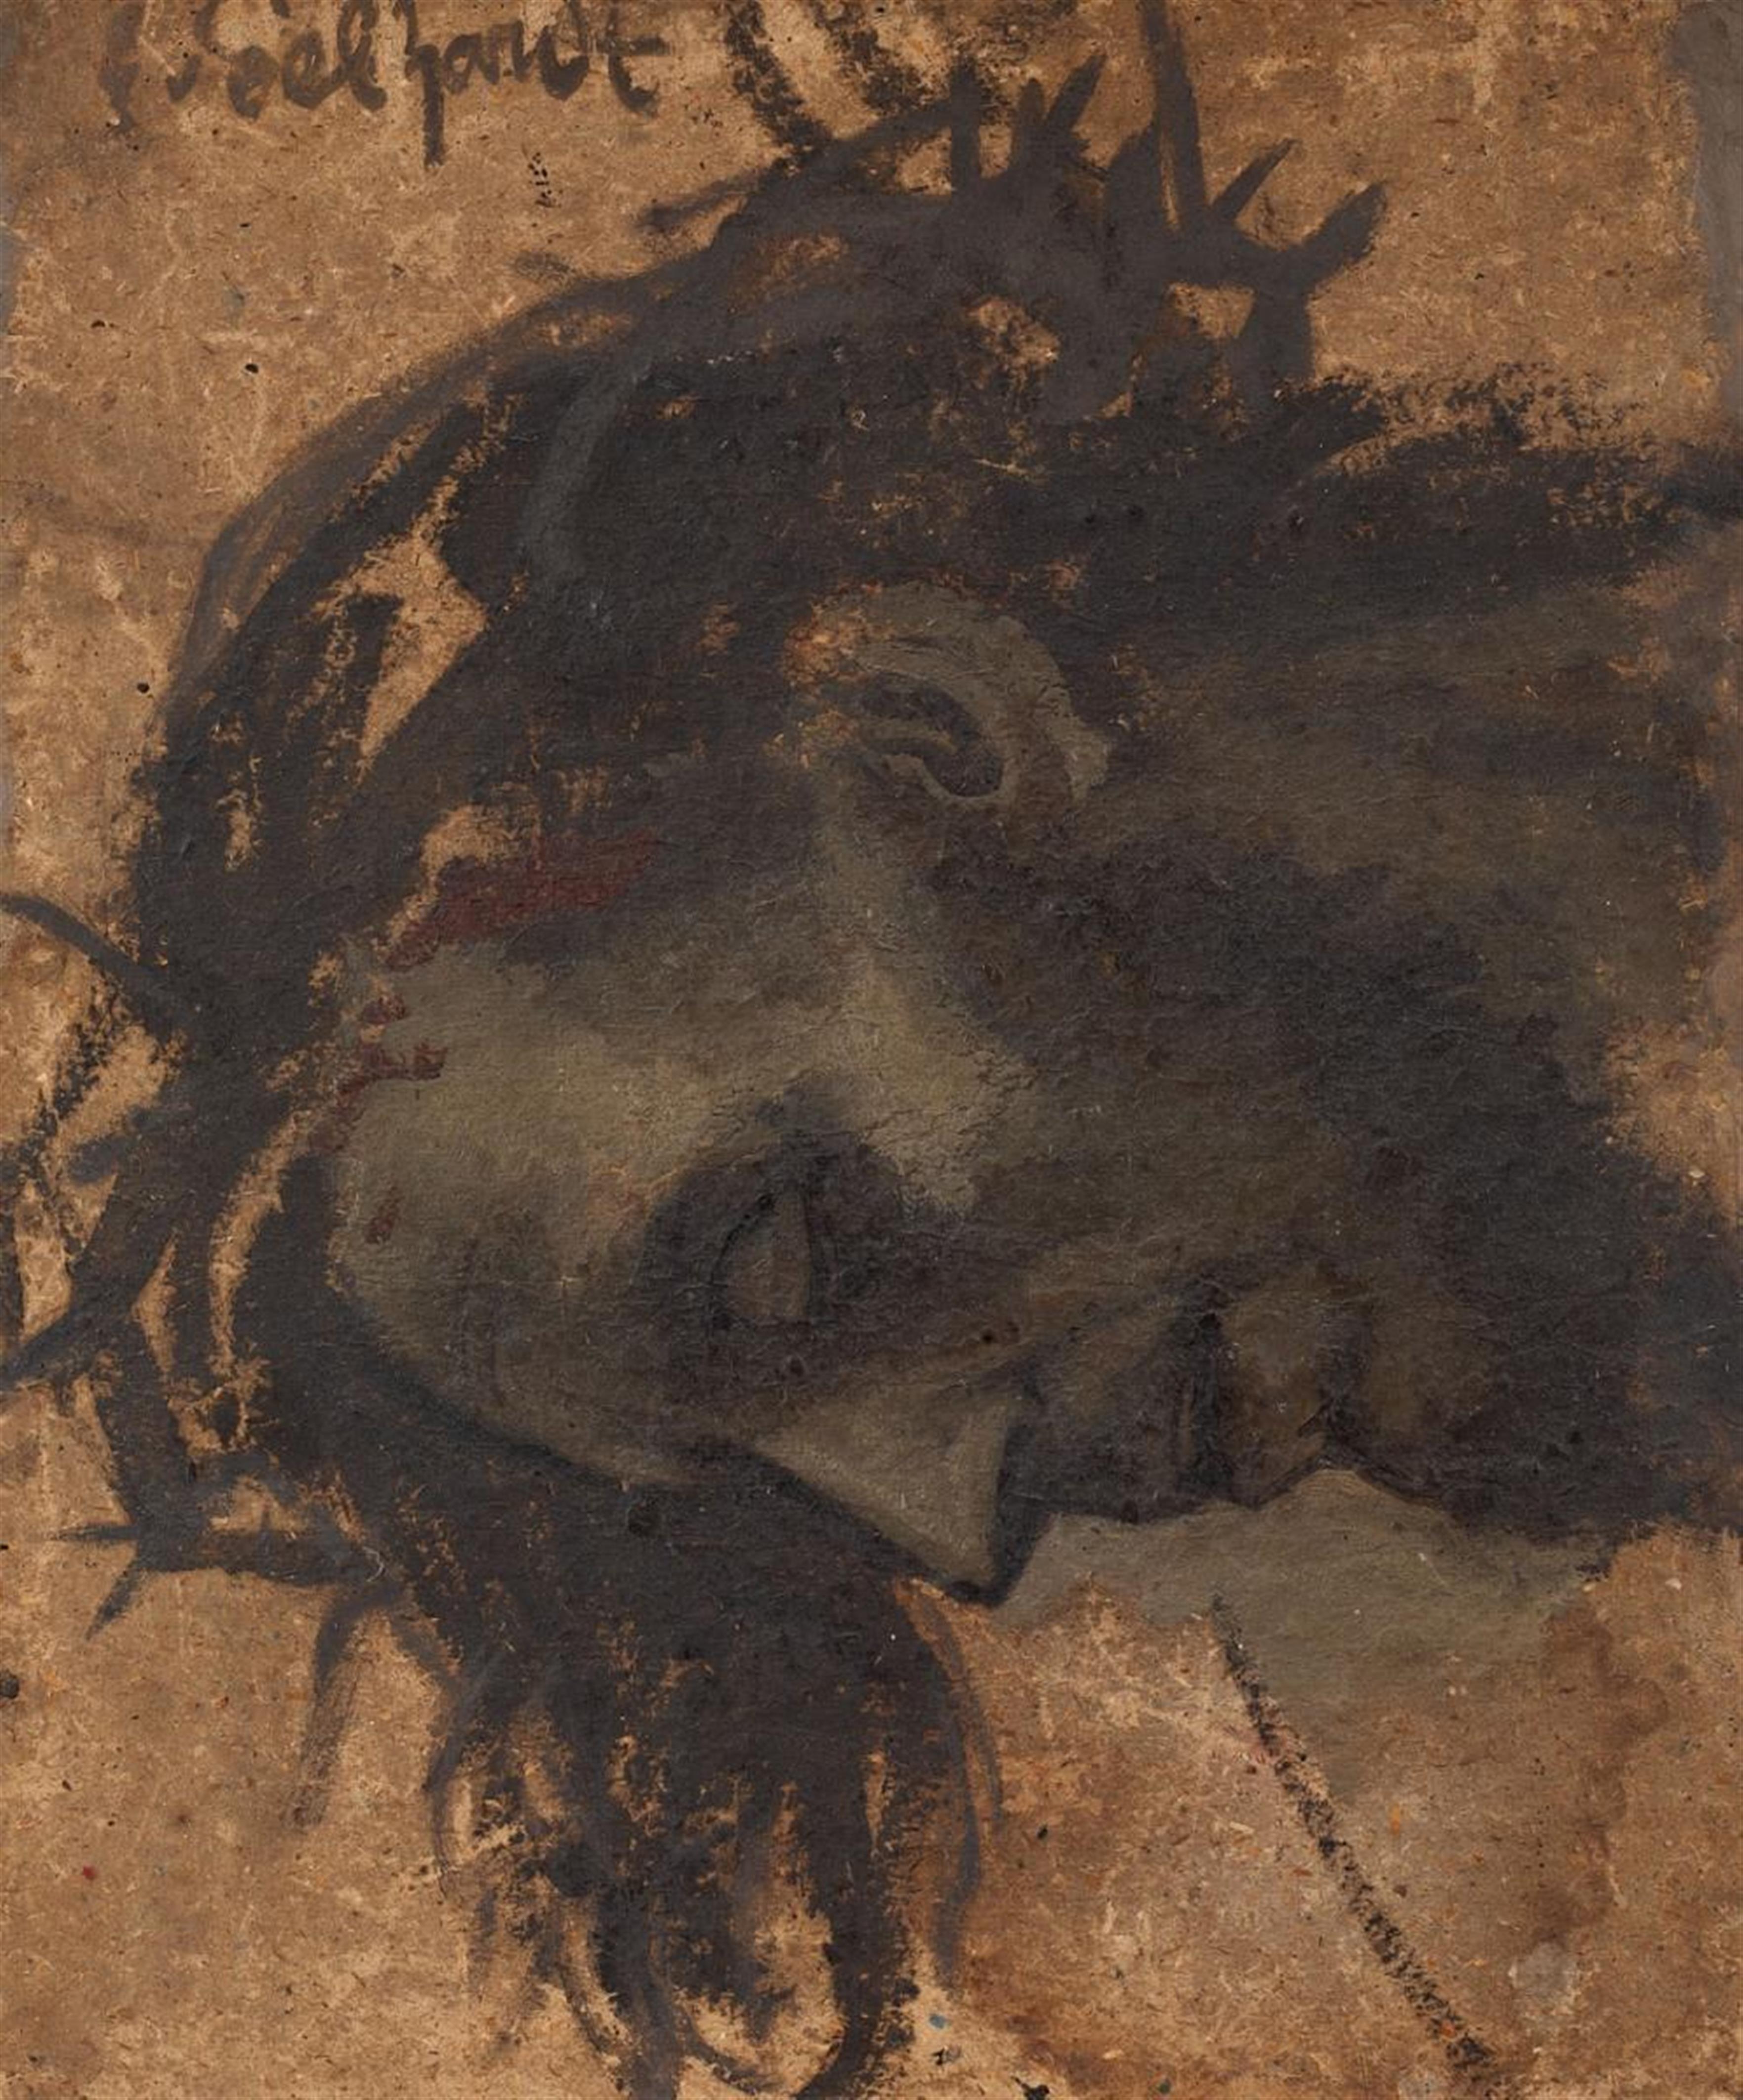 Eduard von Gebhardt - STUDY FOR THE HEAD OF CHRIST IN A CRUCIFIXION - image-1